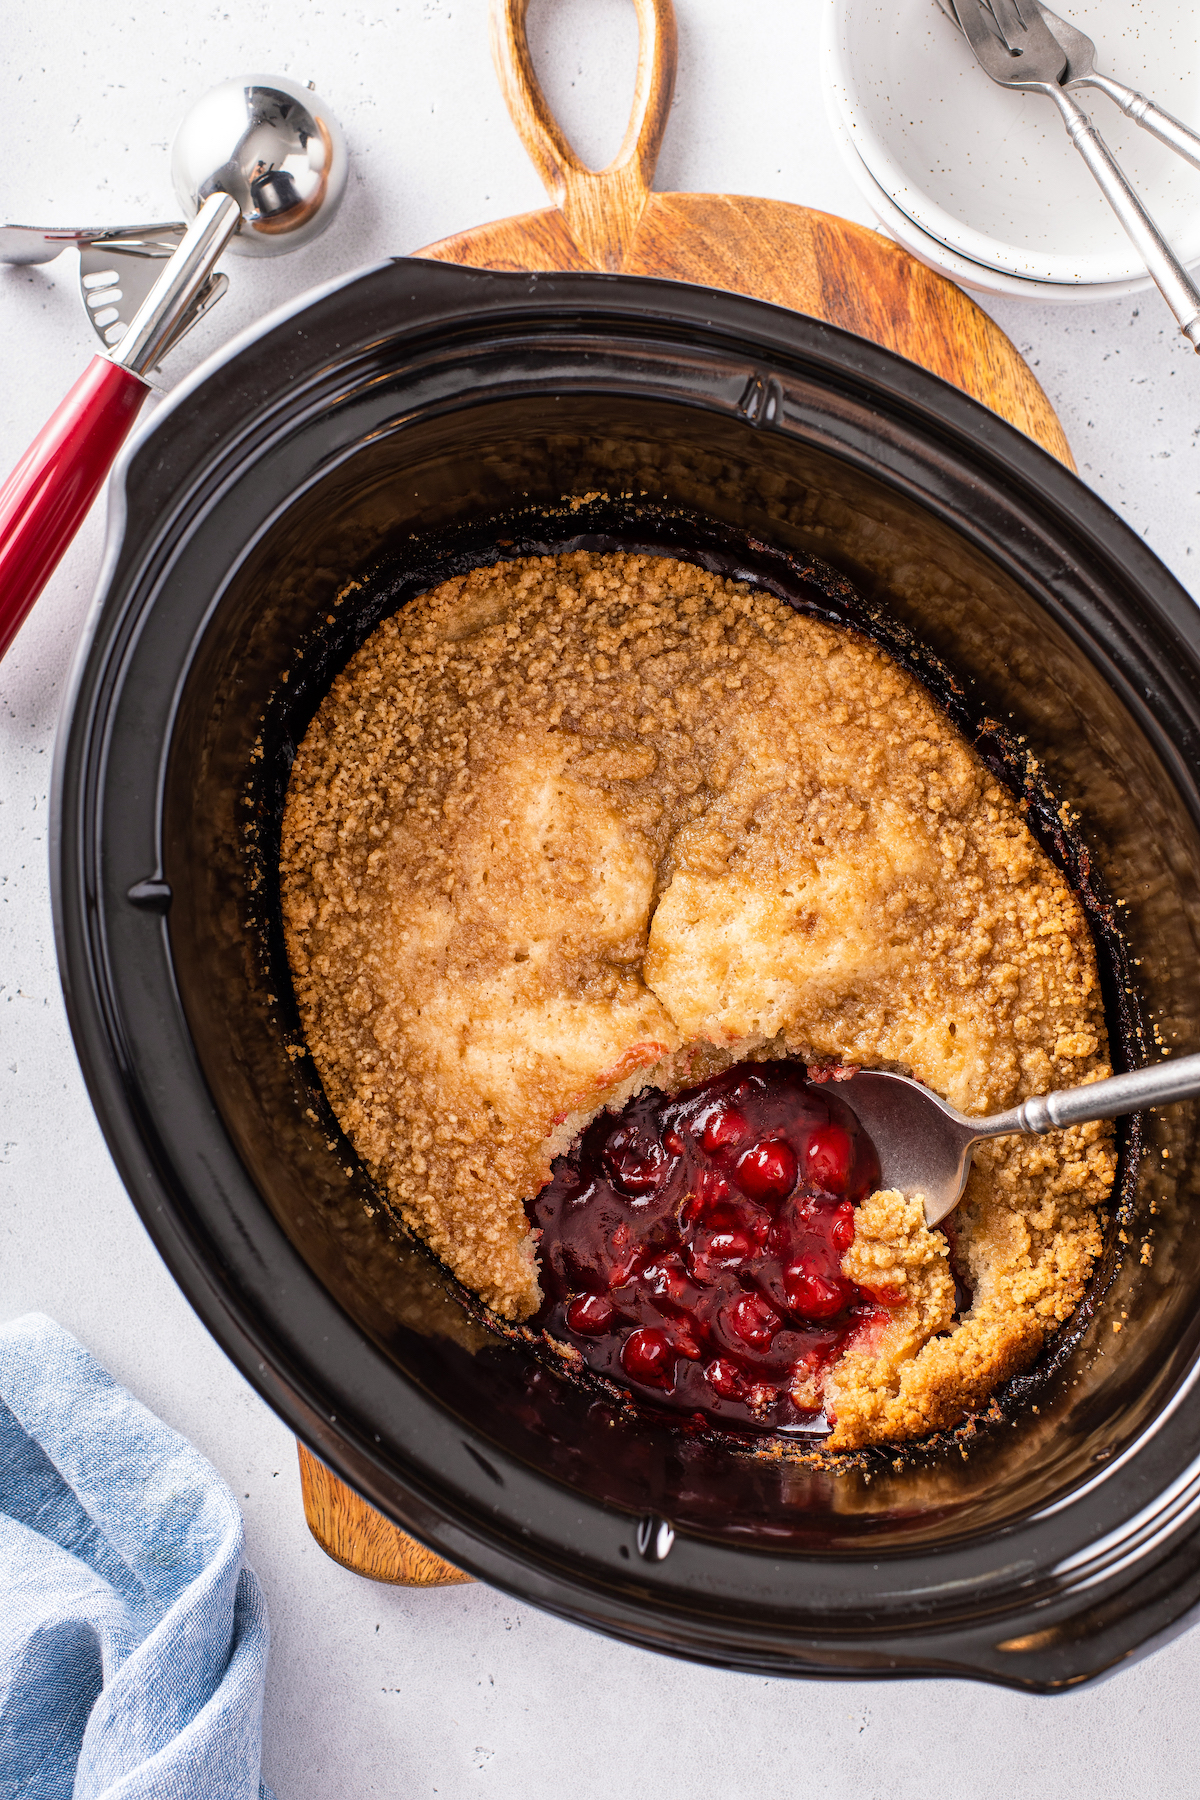 Cherry crockpot cobbler with a spoon scooping up a serving.